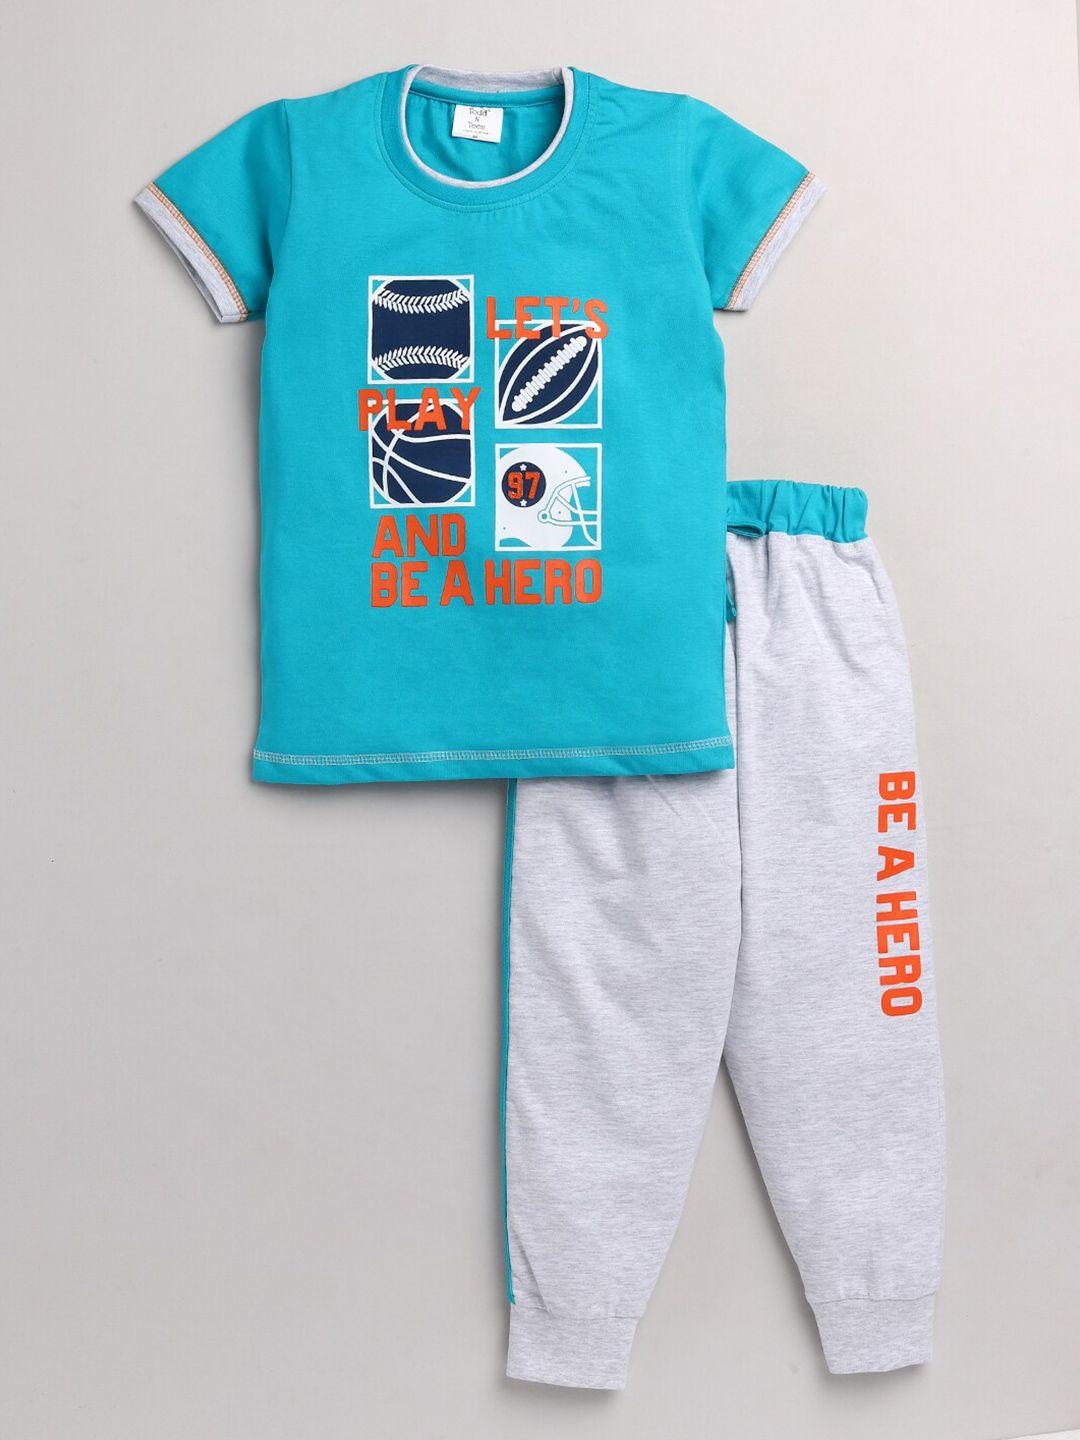 todd n teen boys turquoise blue & orange printed cotton t-shirt with trousers